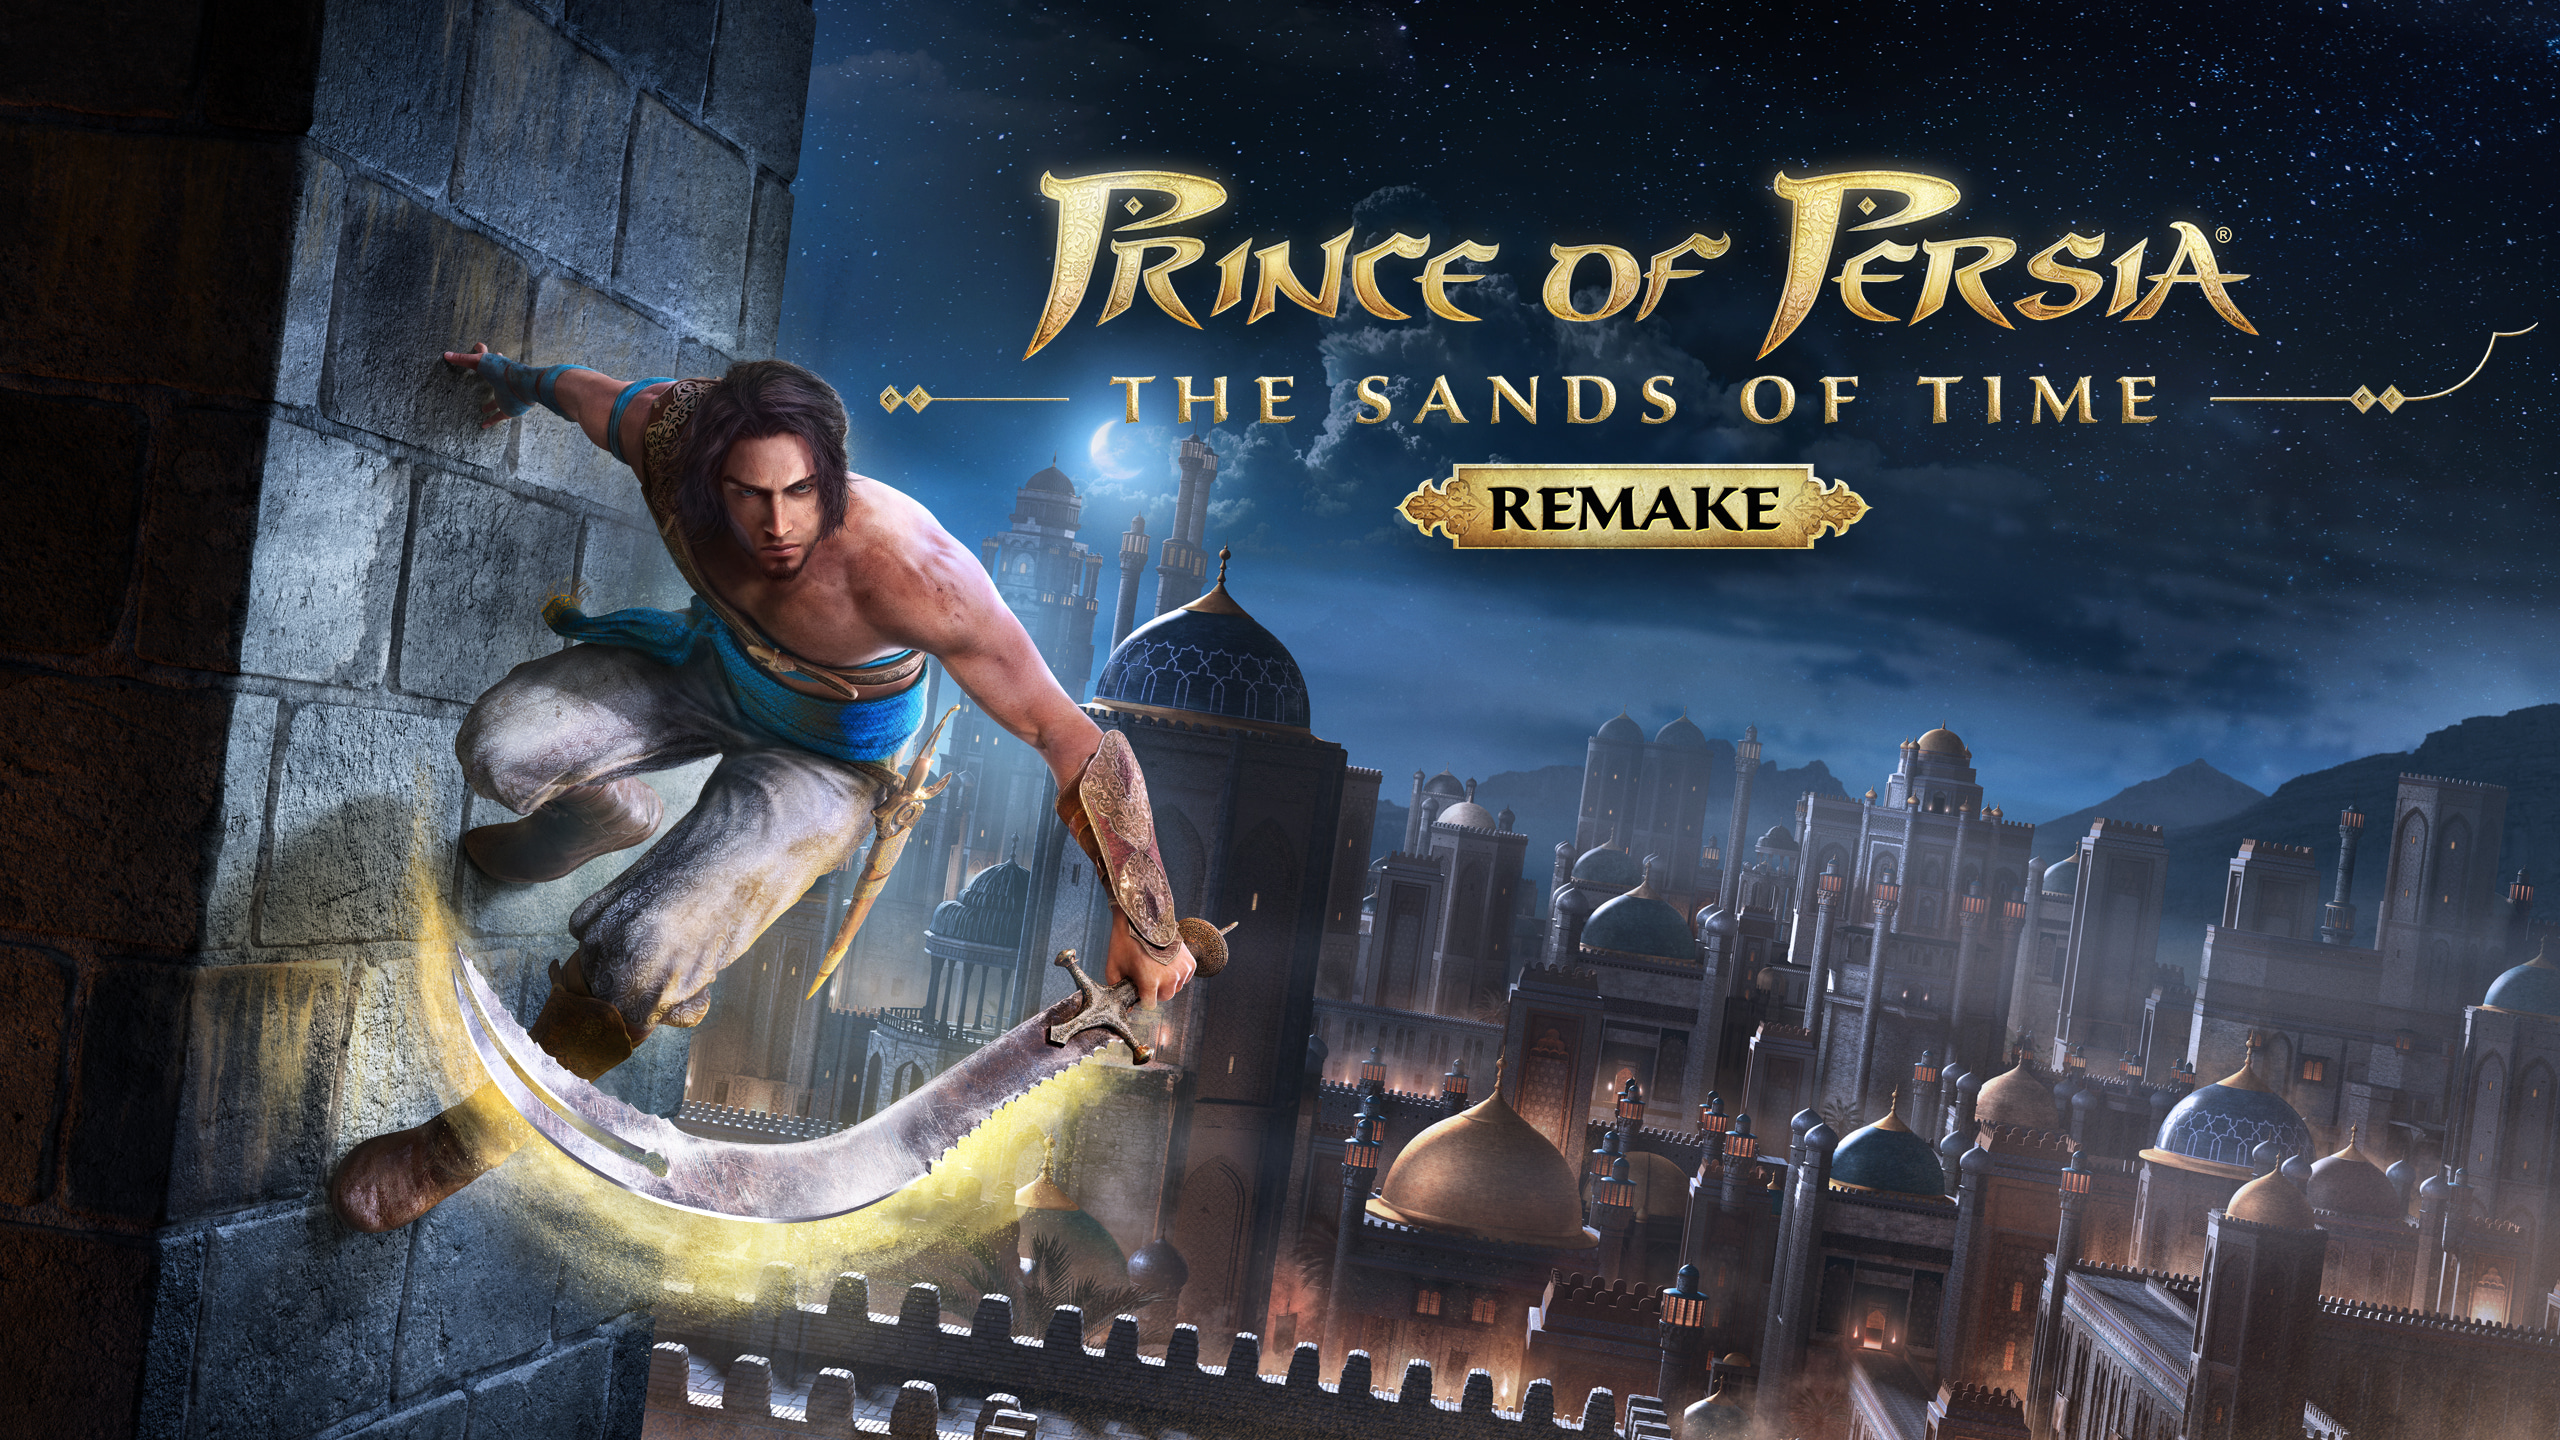 Prince of Persia - The Sands of Time Remake